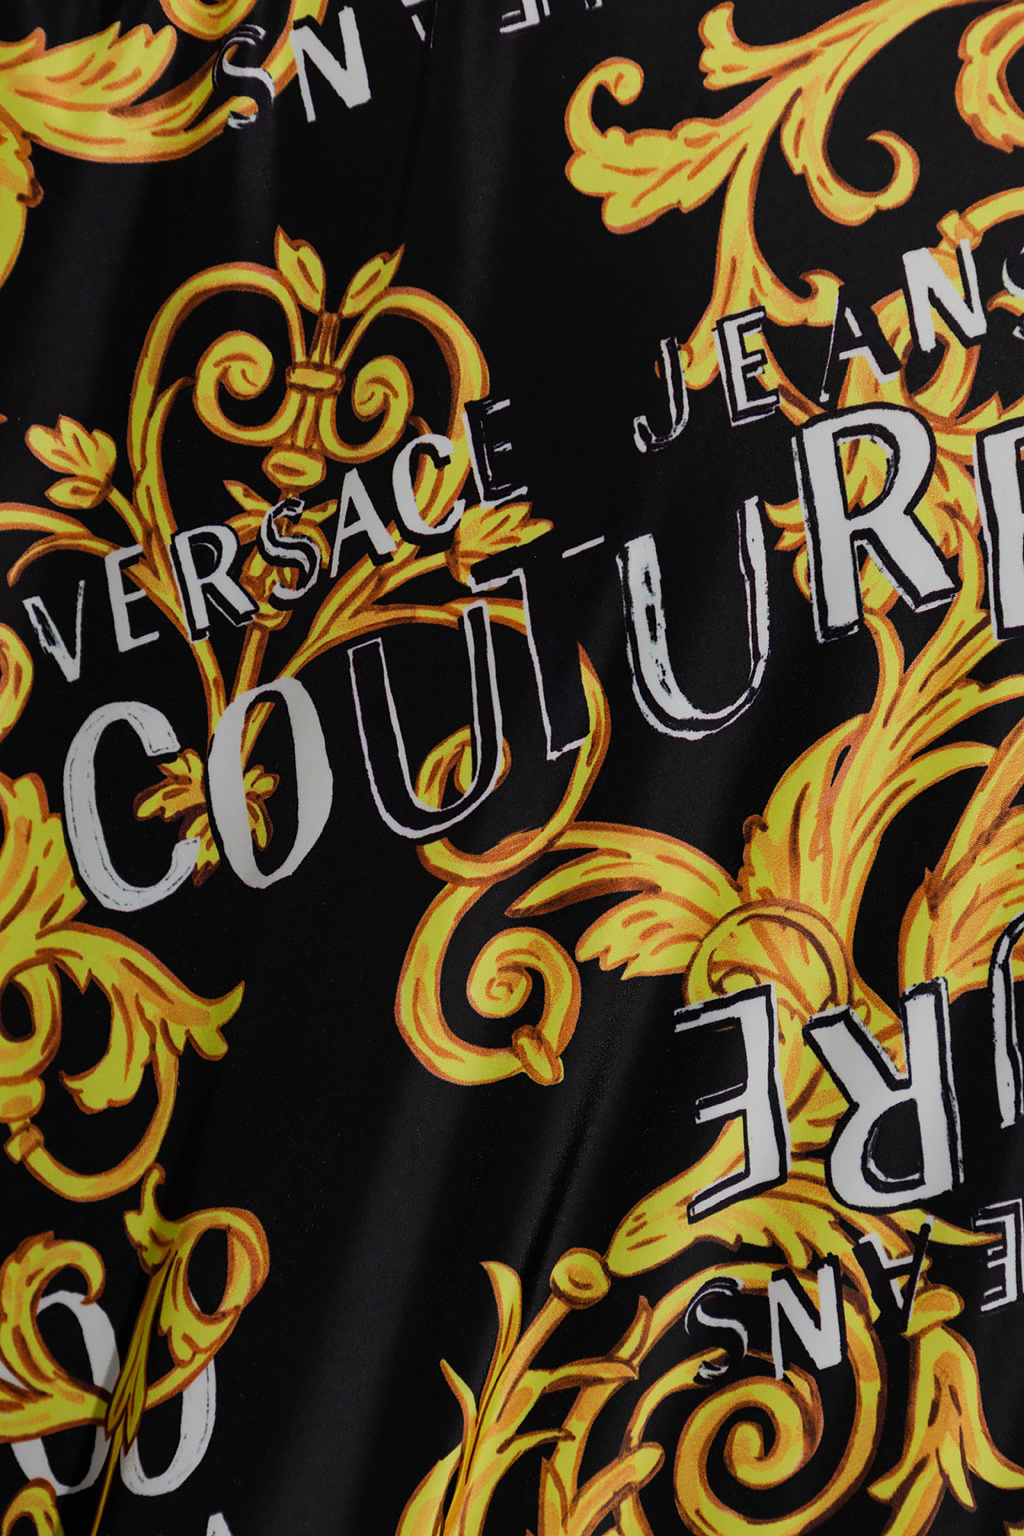 Versace Jeans Couture Black and Gold Logo Leggings Versace